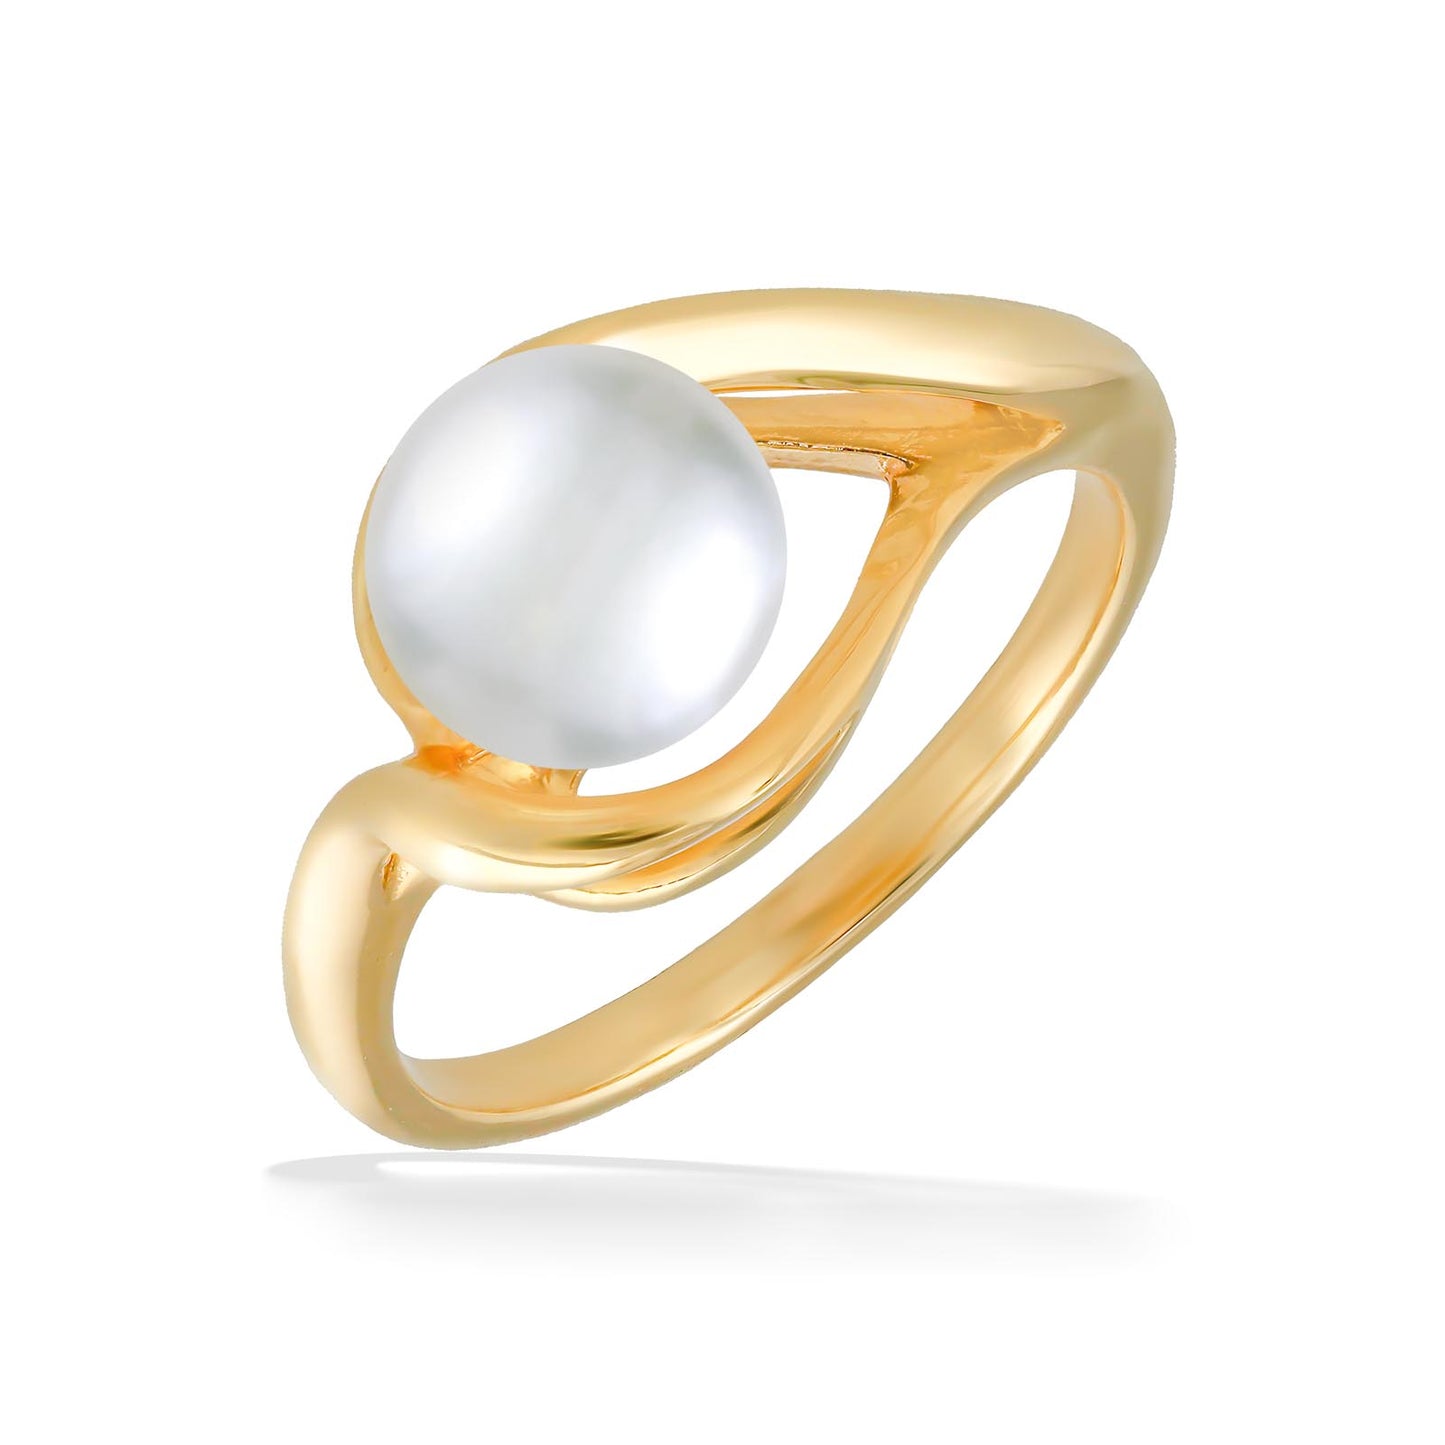 41600 - 14K Yellow Gold - Embrace Ring